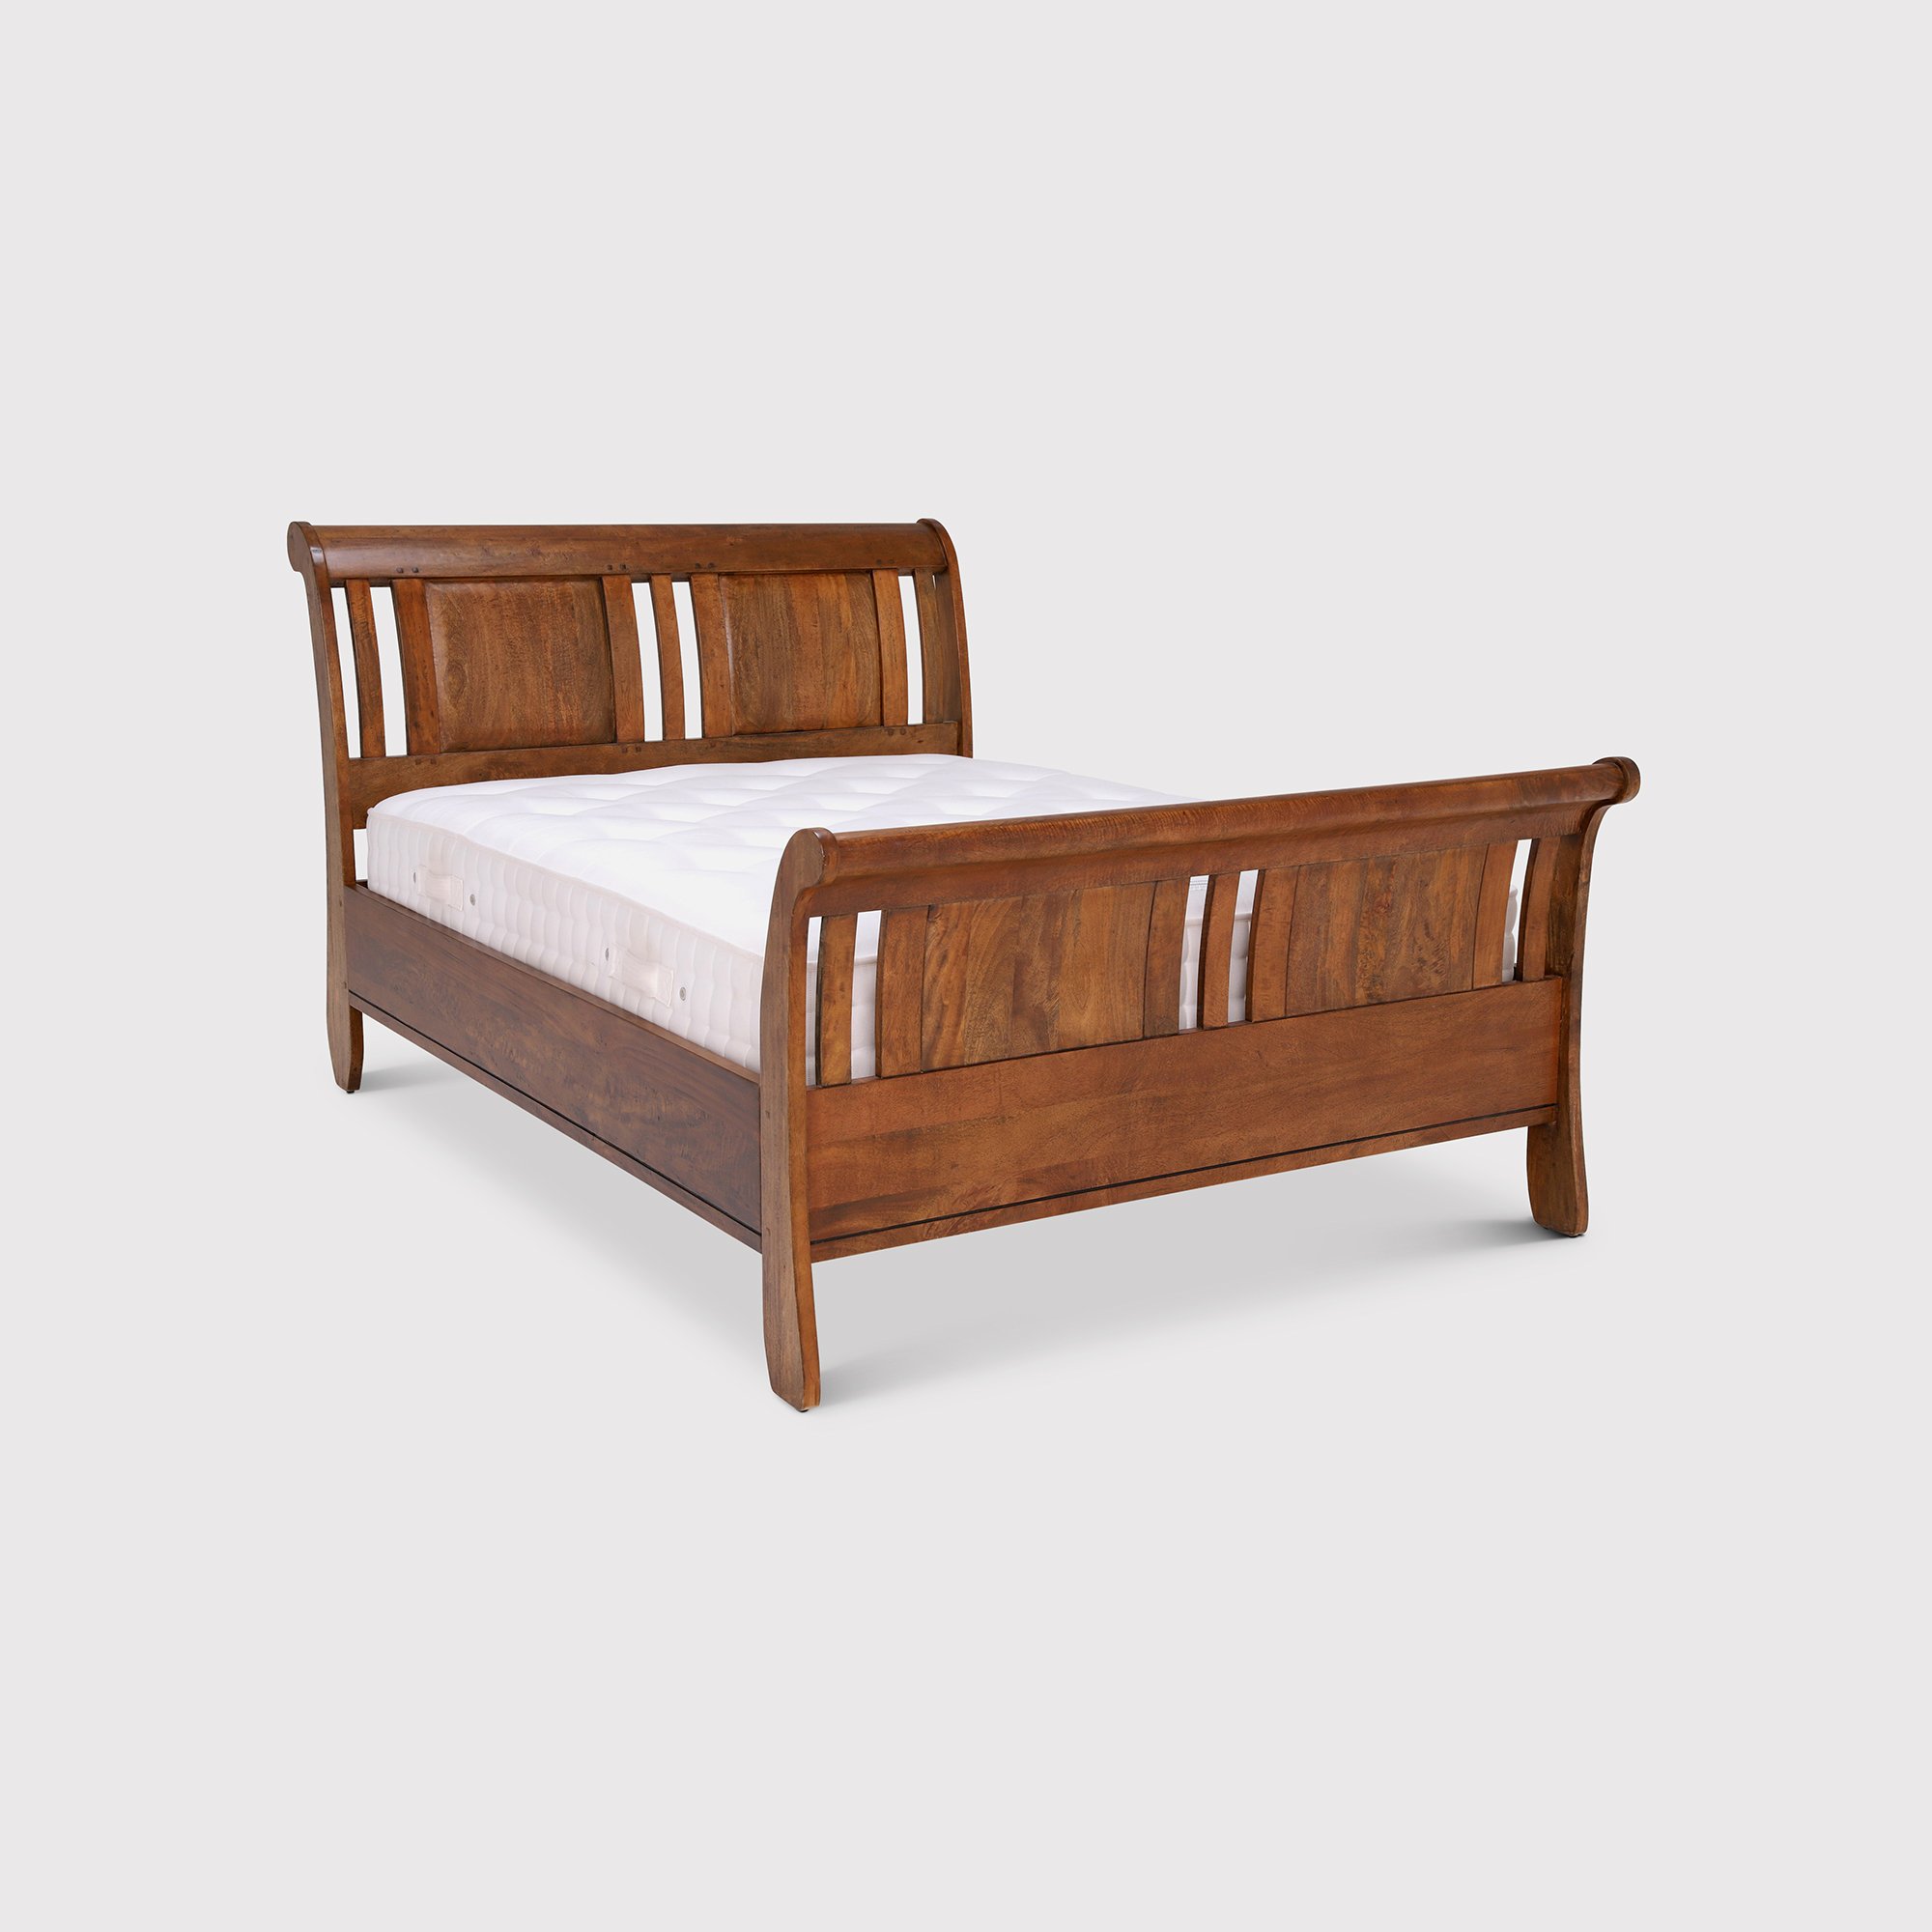 New Frontier 150cm Sleigh Bed, Brown | King | Barker & Stonehouse